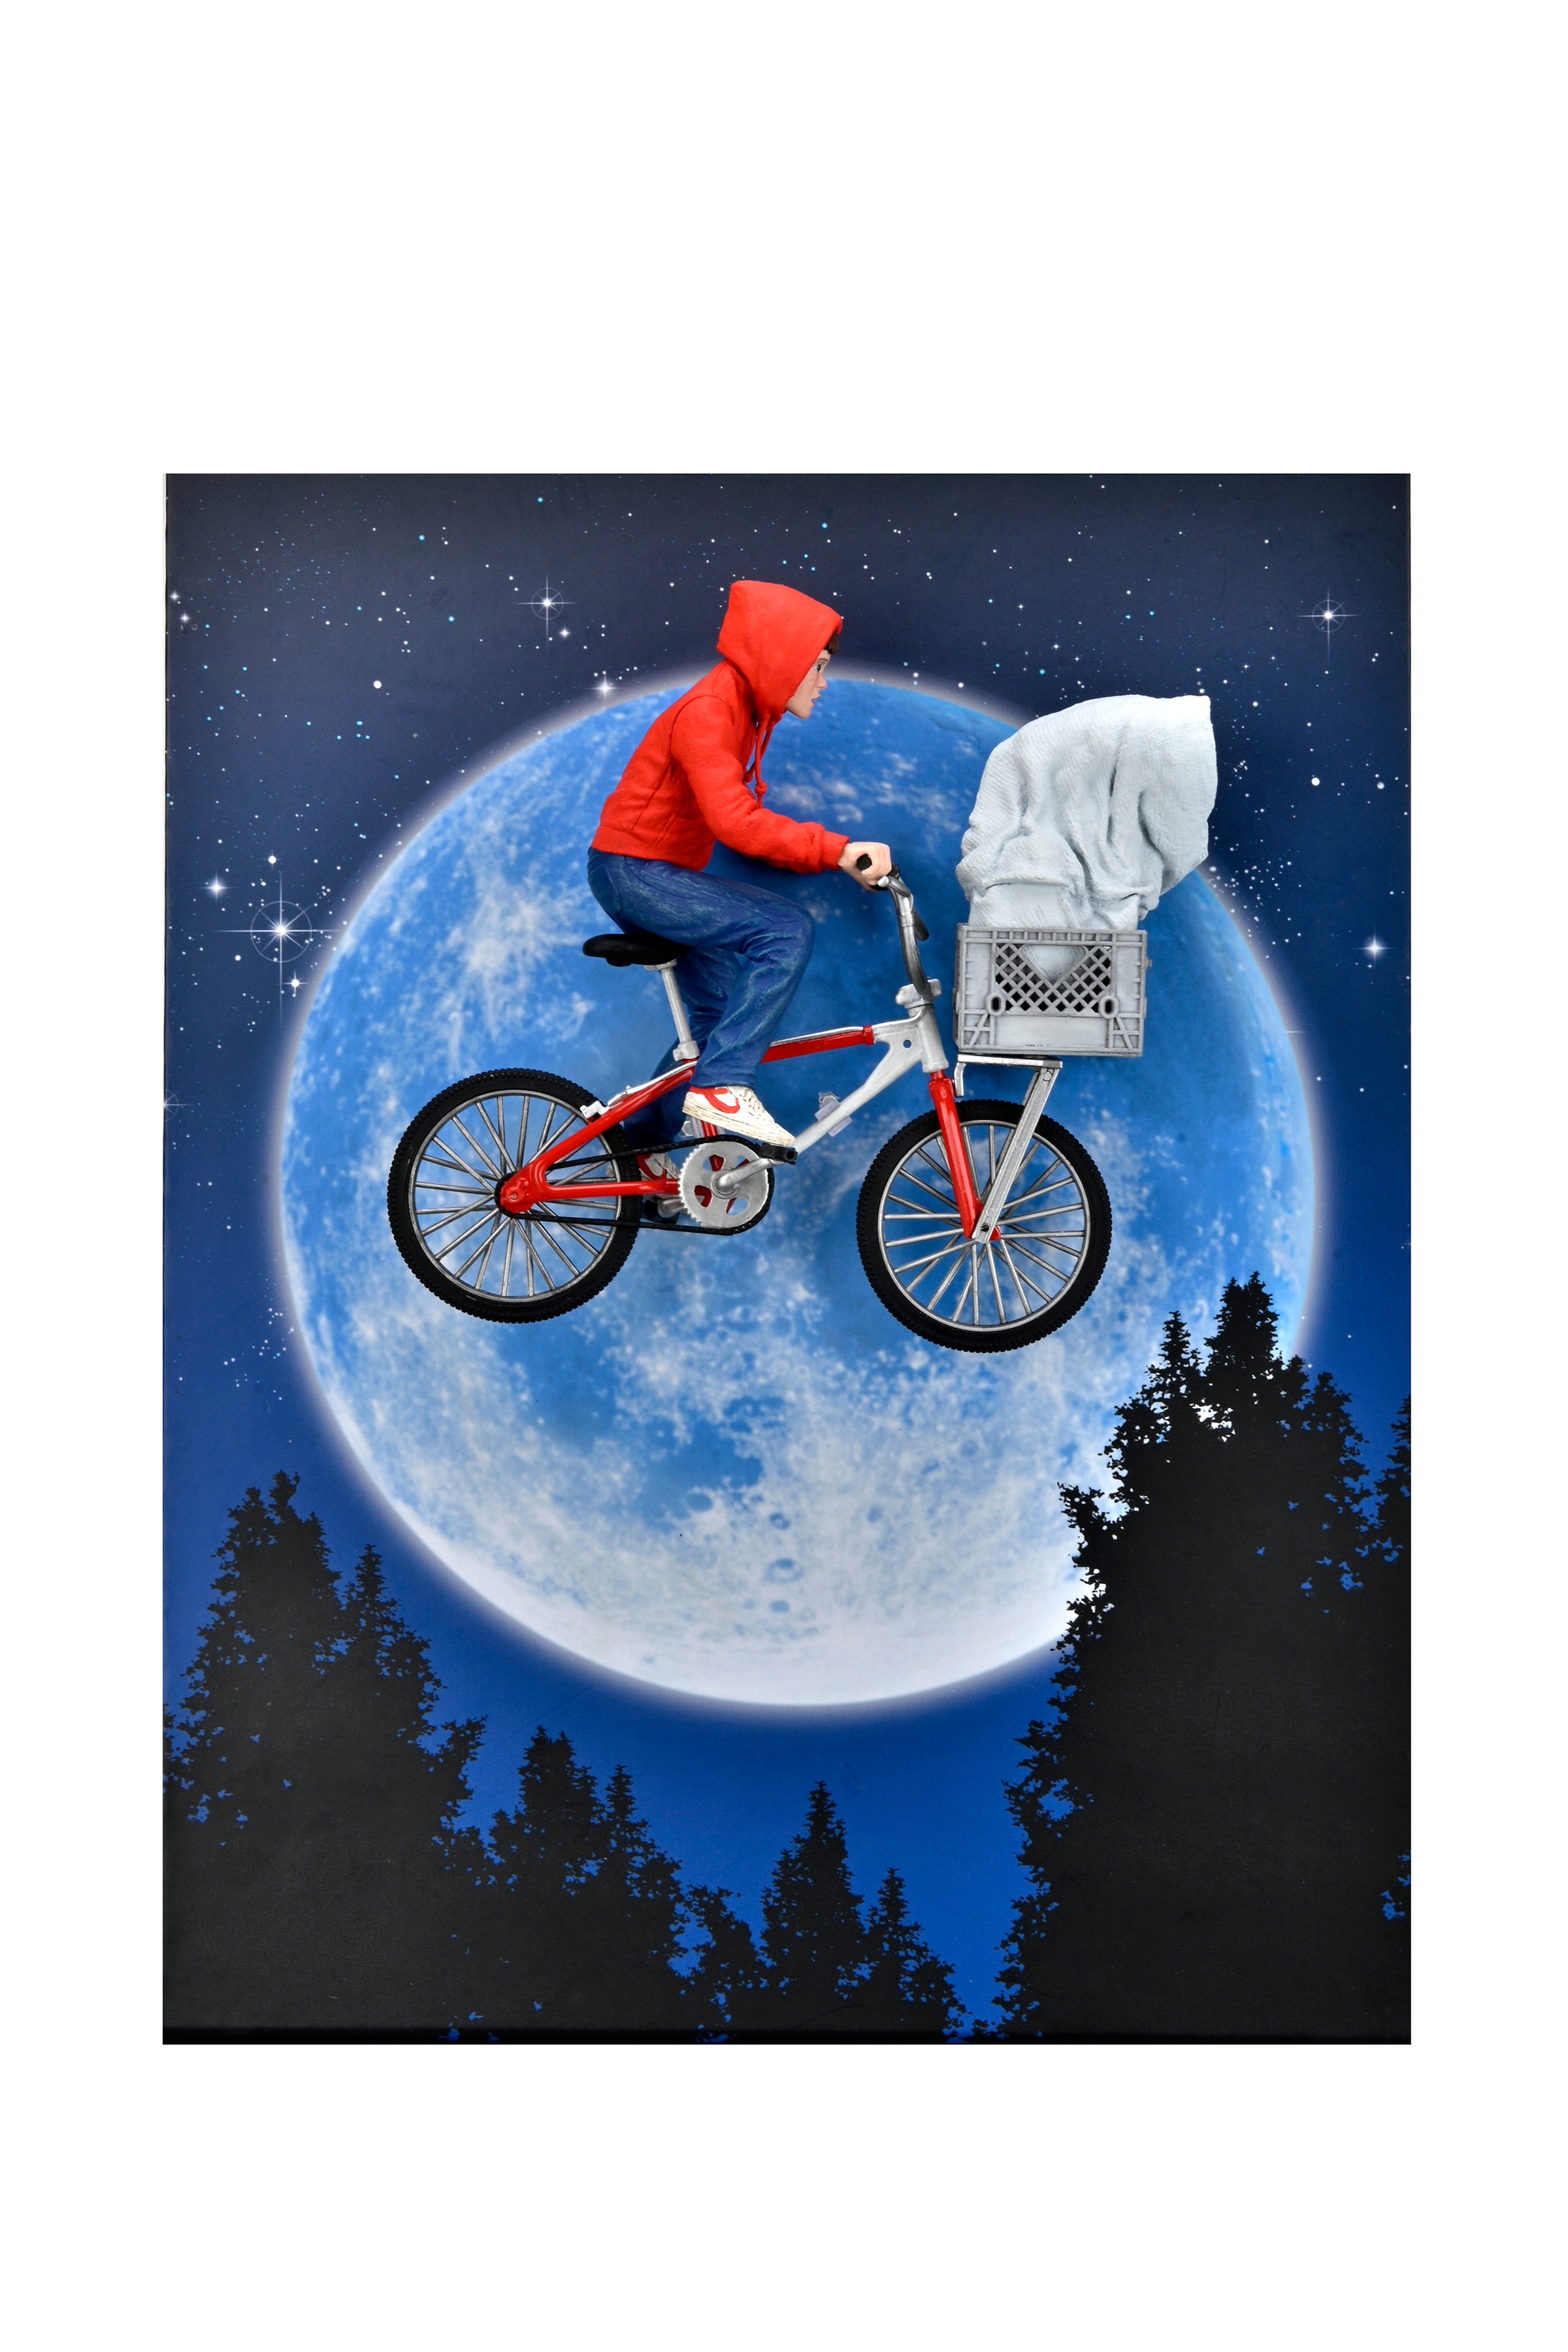 E.T. The Extra-Terrestrial - Elliott & E.T. on Bicycle (40th Anniversary) 7" Scale Action Figure - NECA